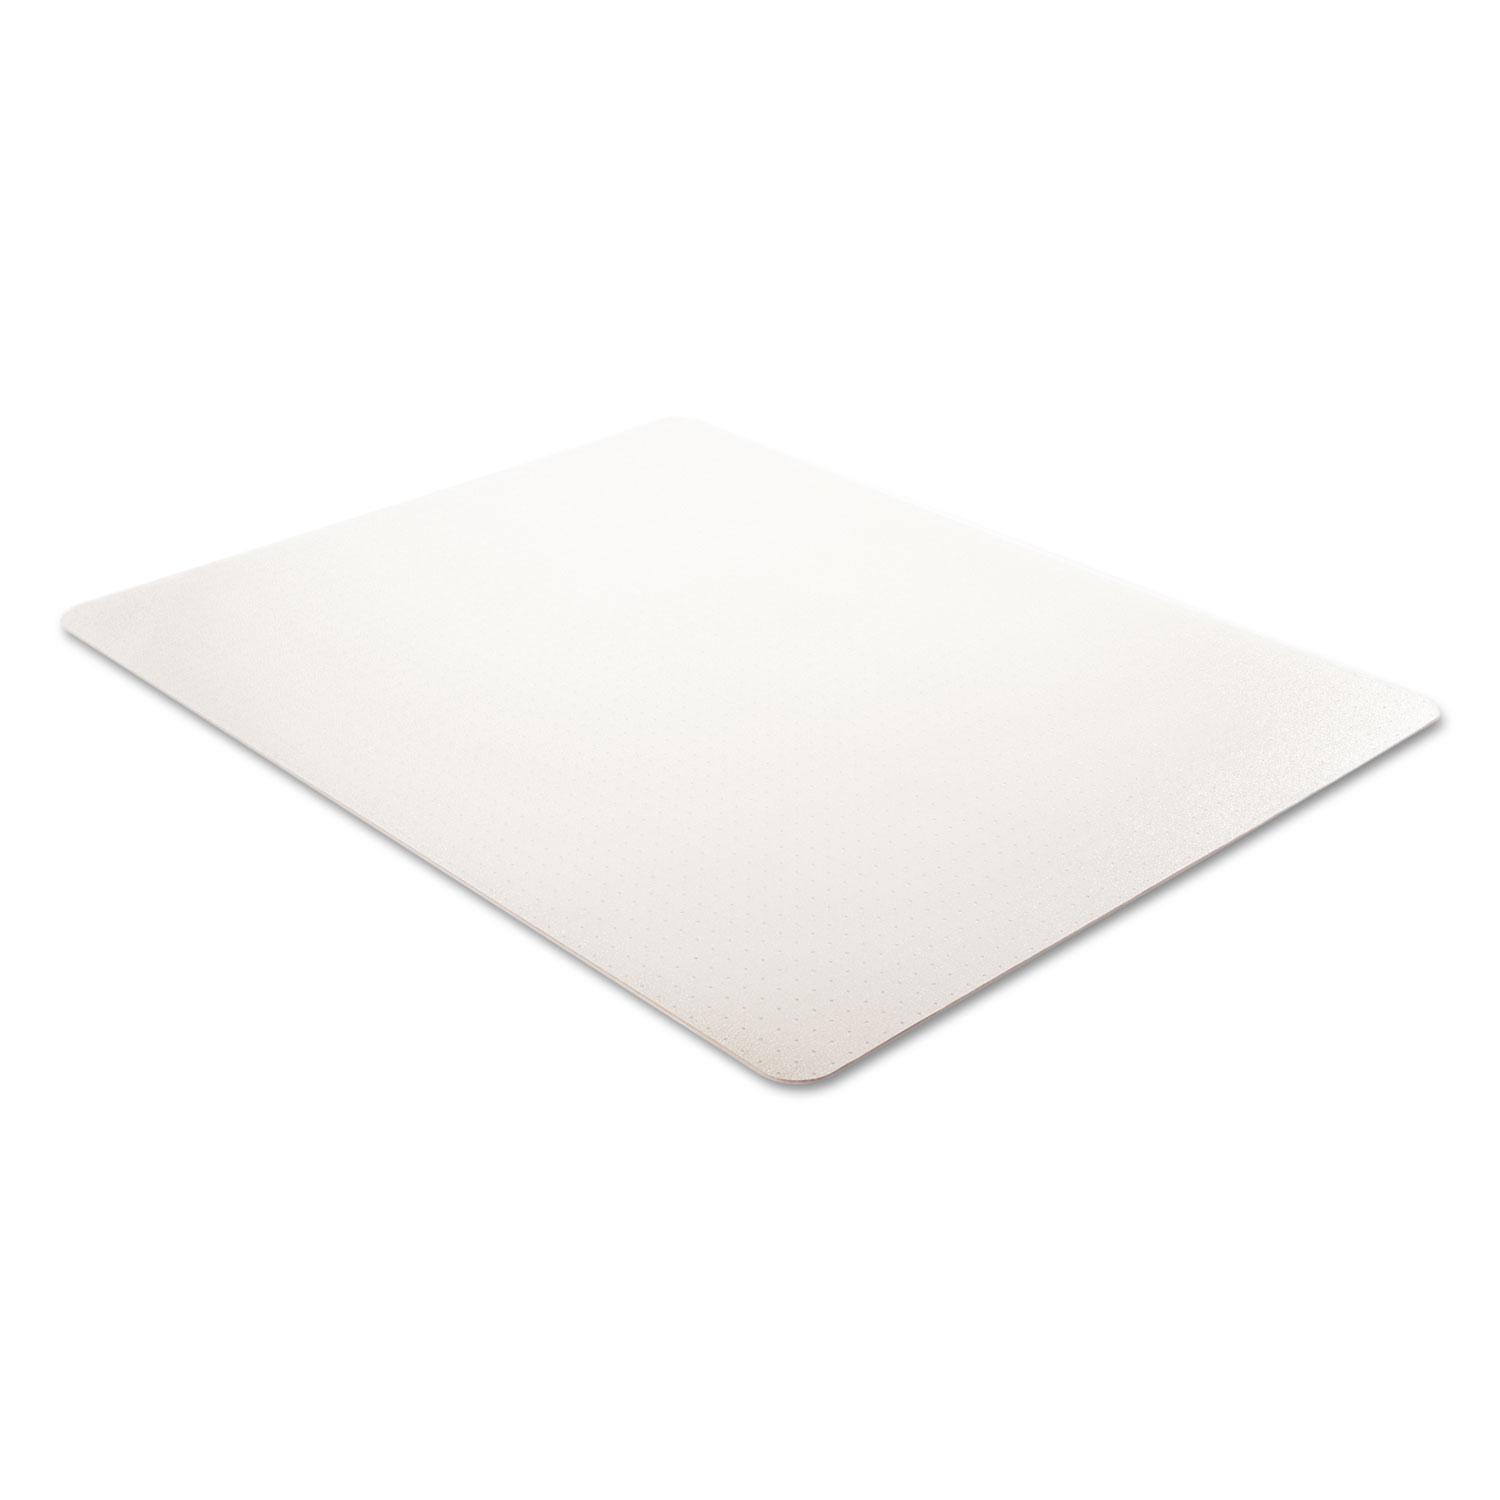 EconoMat Occasional Use Chair Mat for Low Pile, 46 x 60, Clear